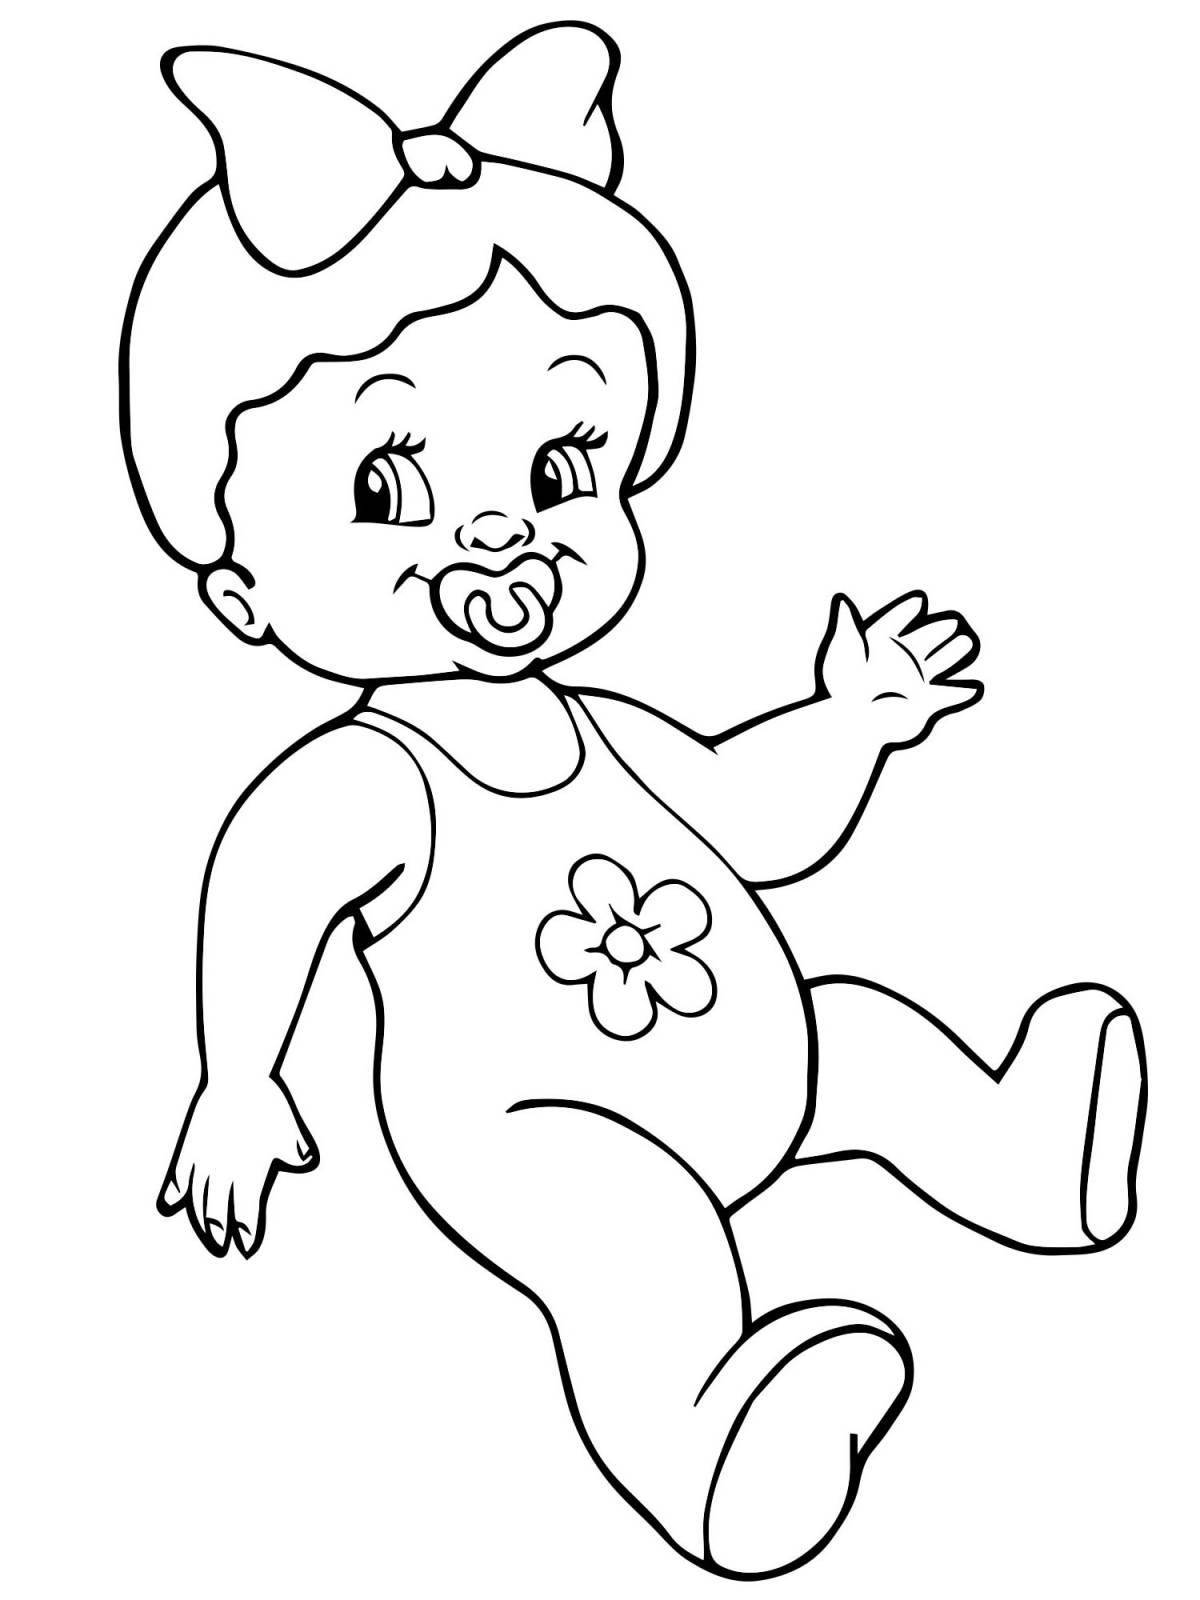 Charming baby born coloring book